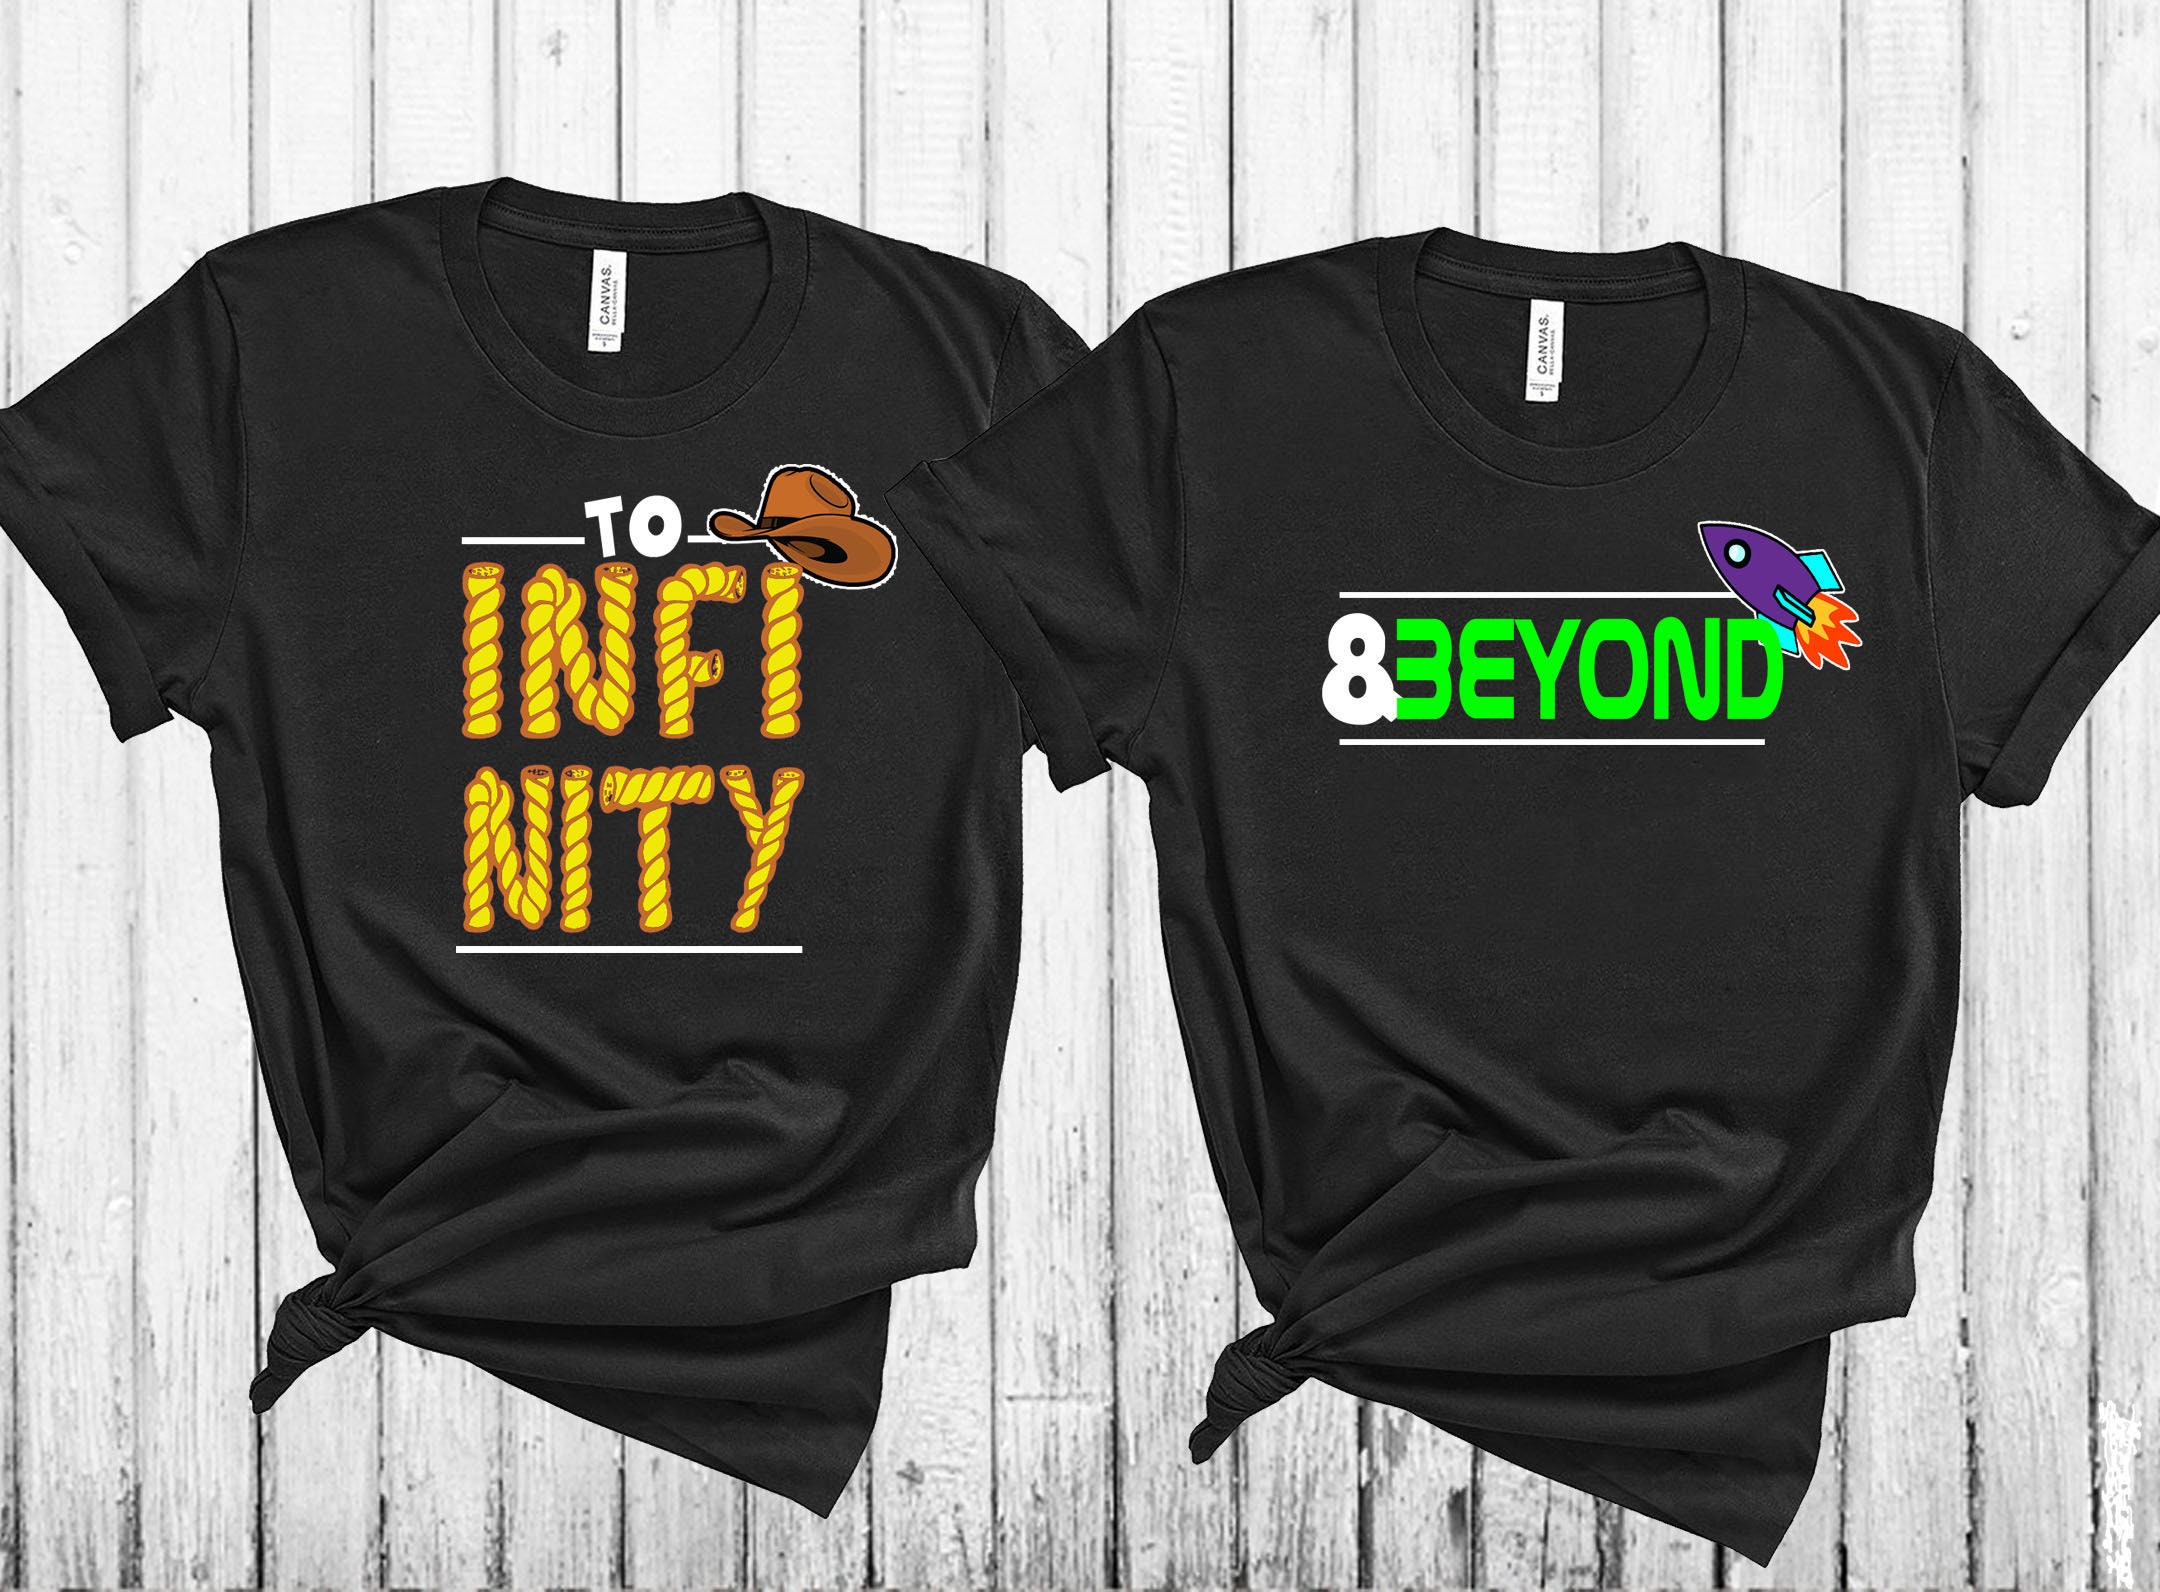 To Infinity And Beyond Couple Hoodies, Matching Hoodies for Couples